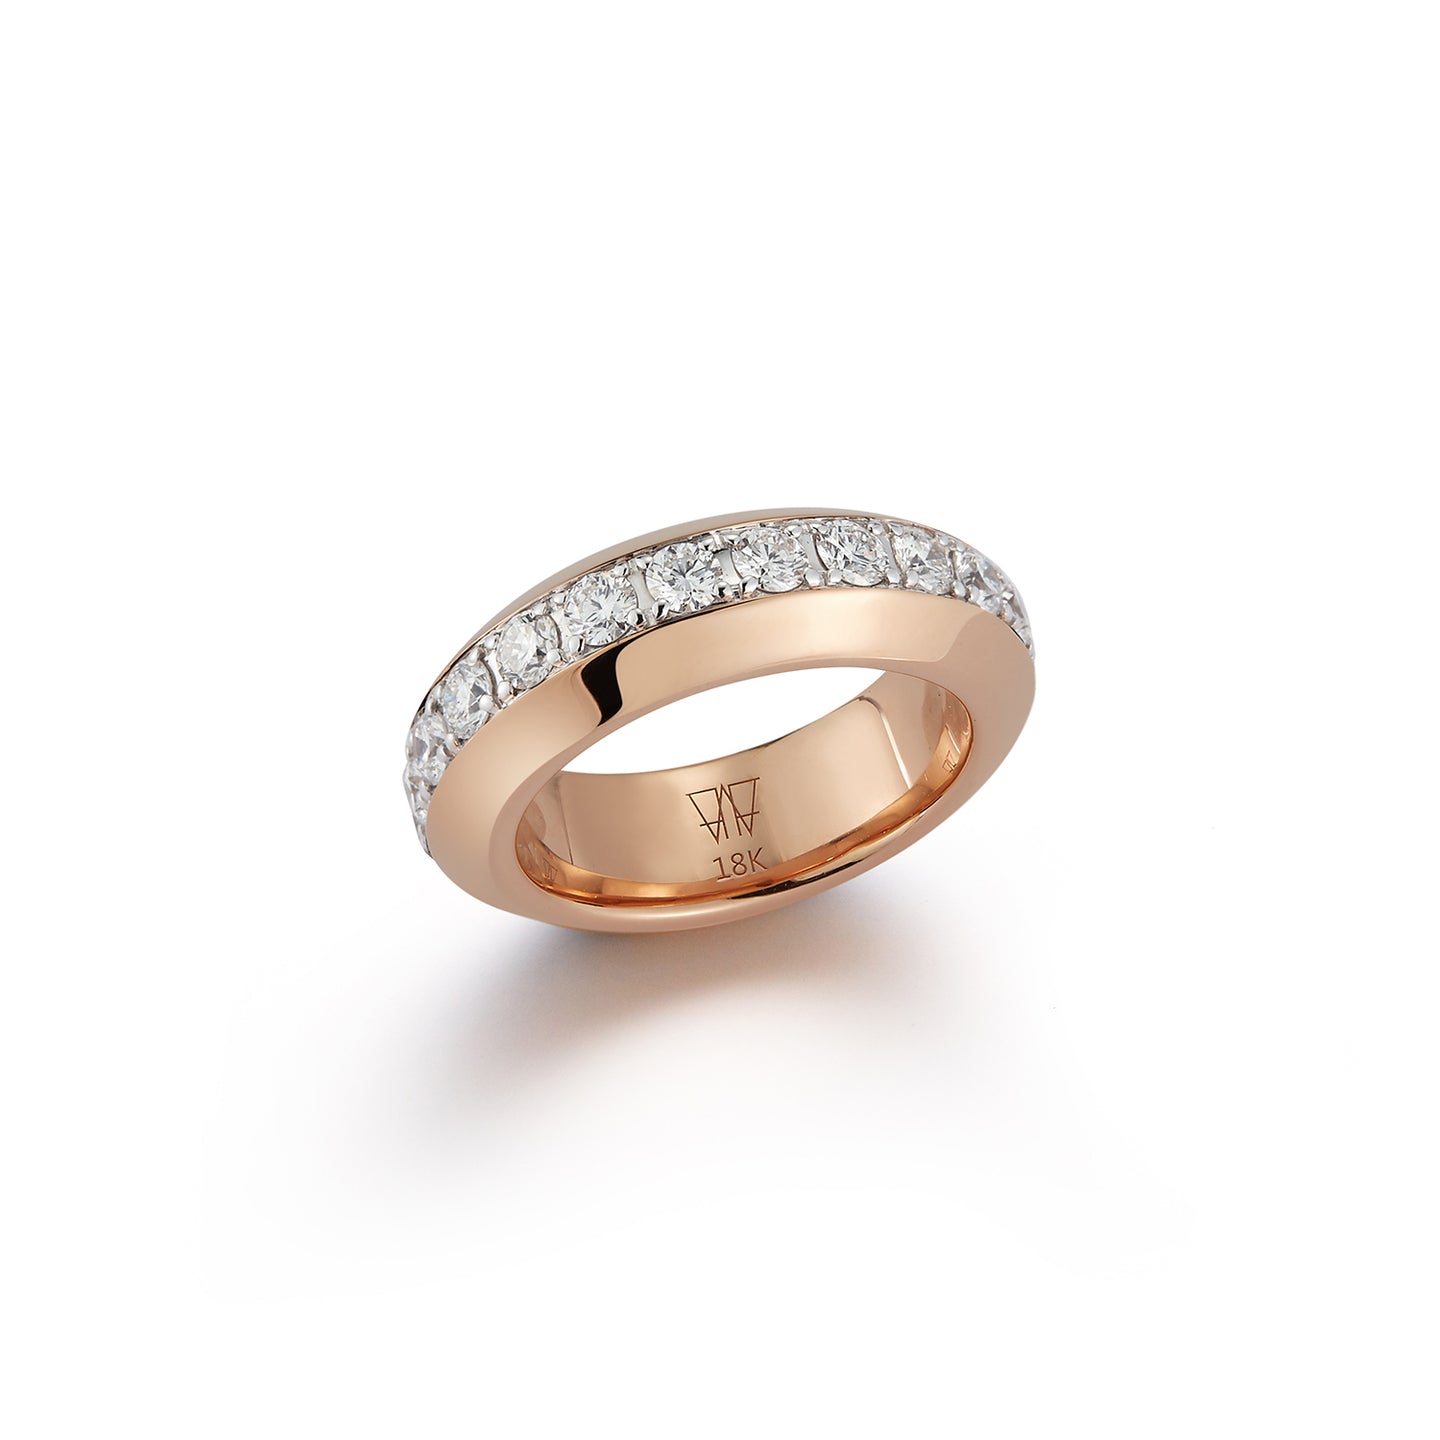 GRANT 18K ROSE GOLD AND WHITE ANGLED BAND RING